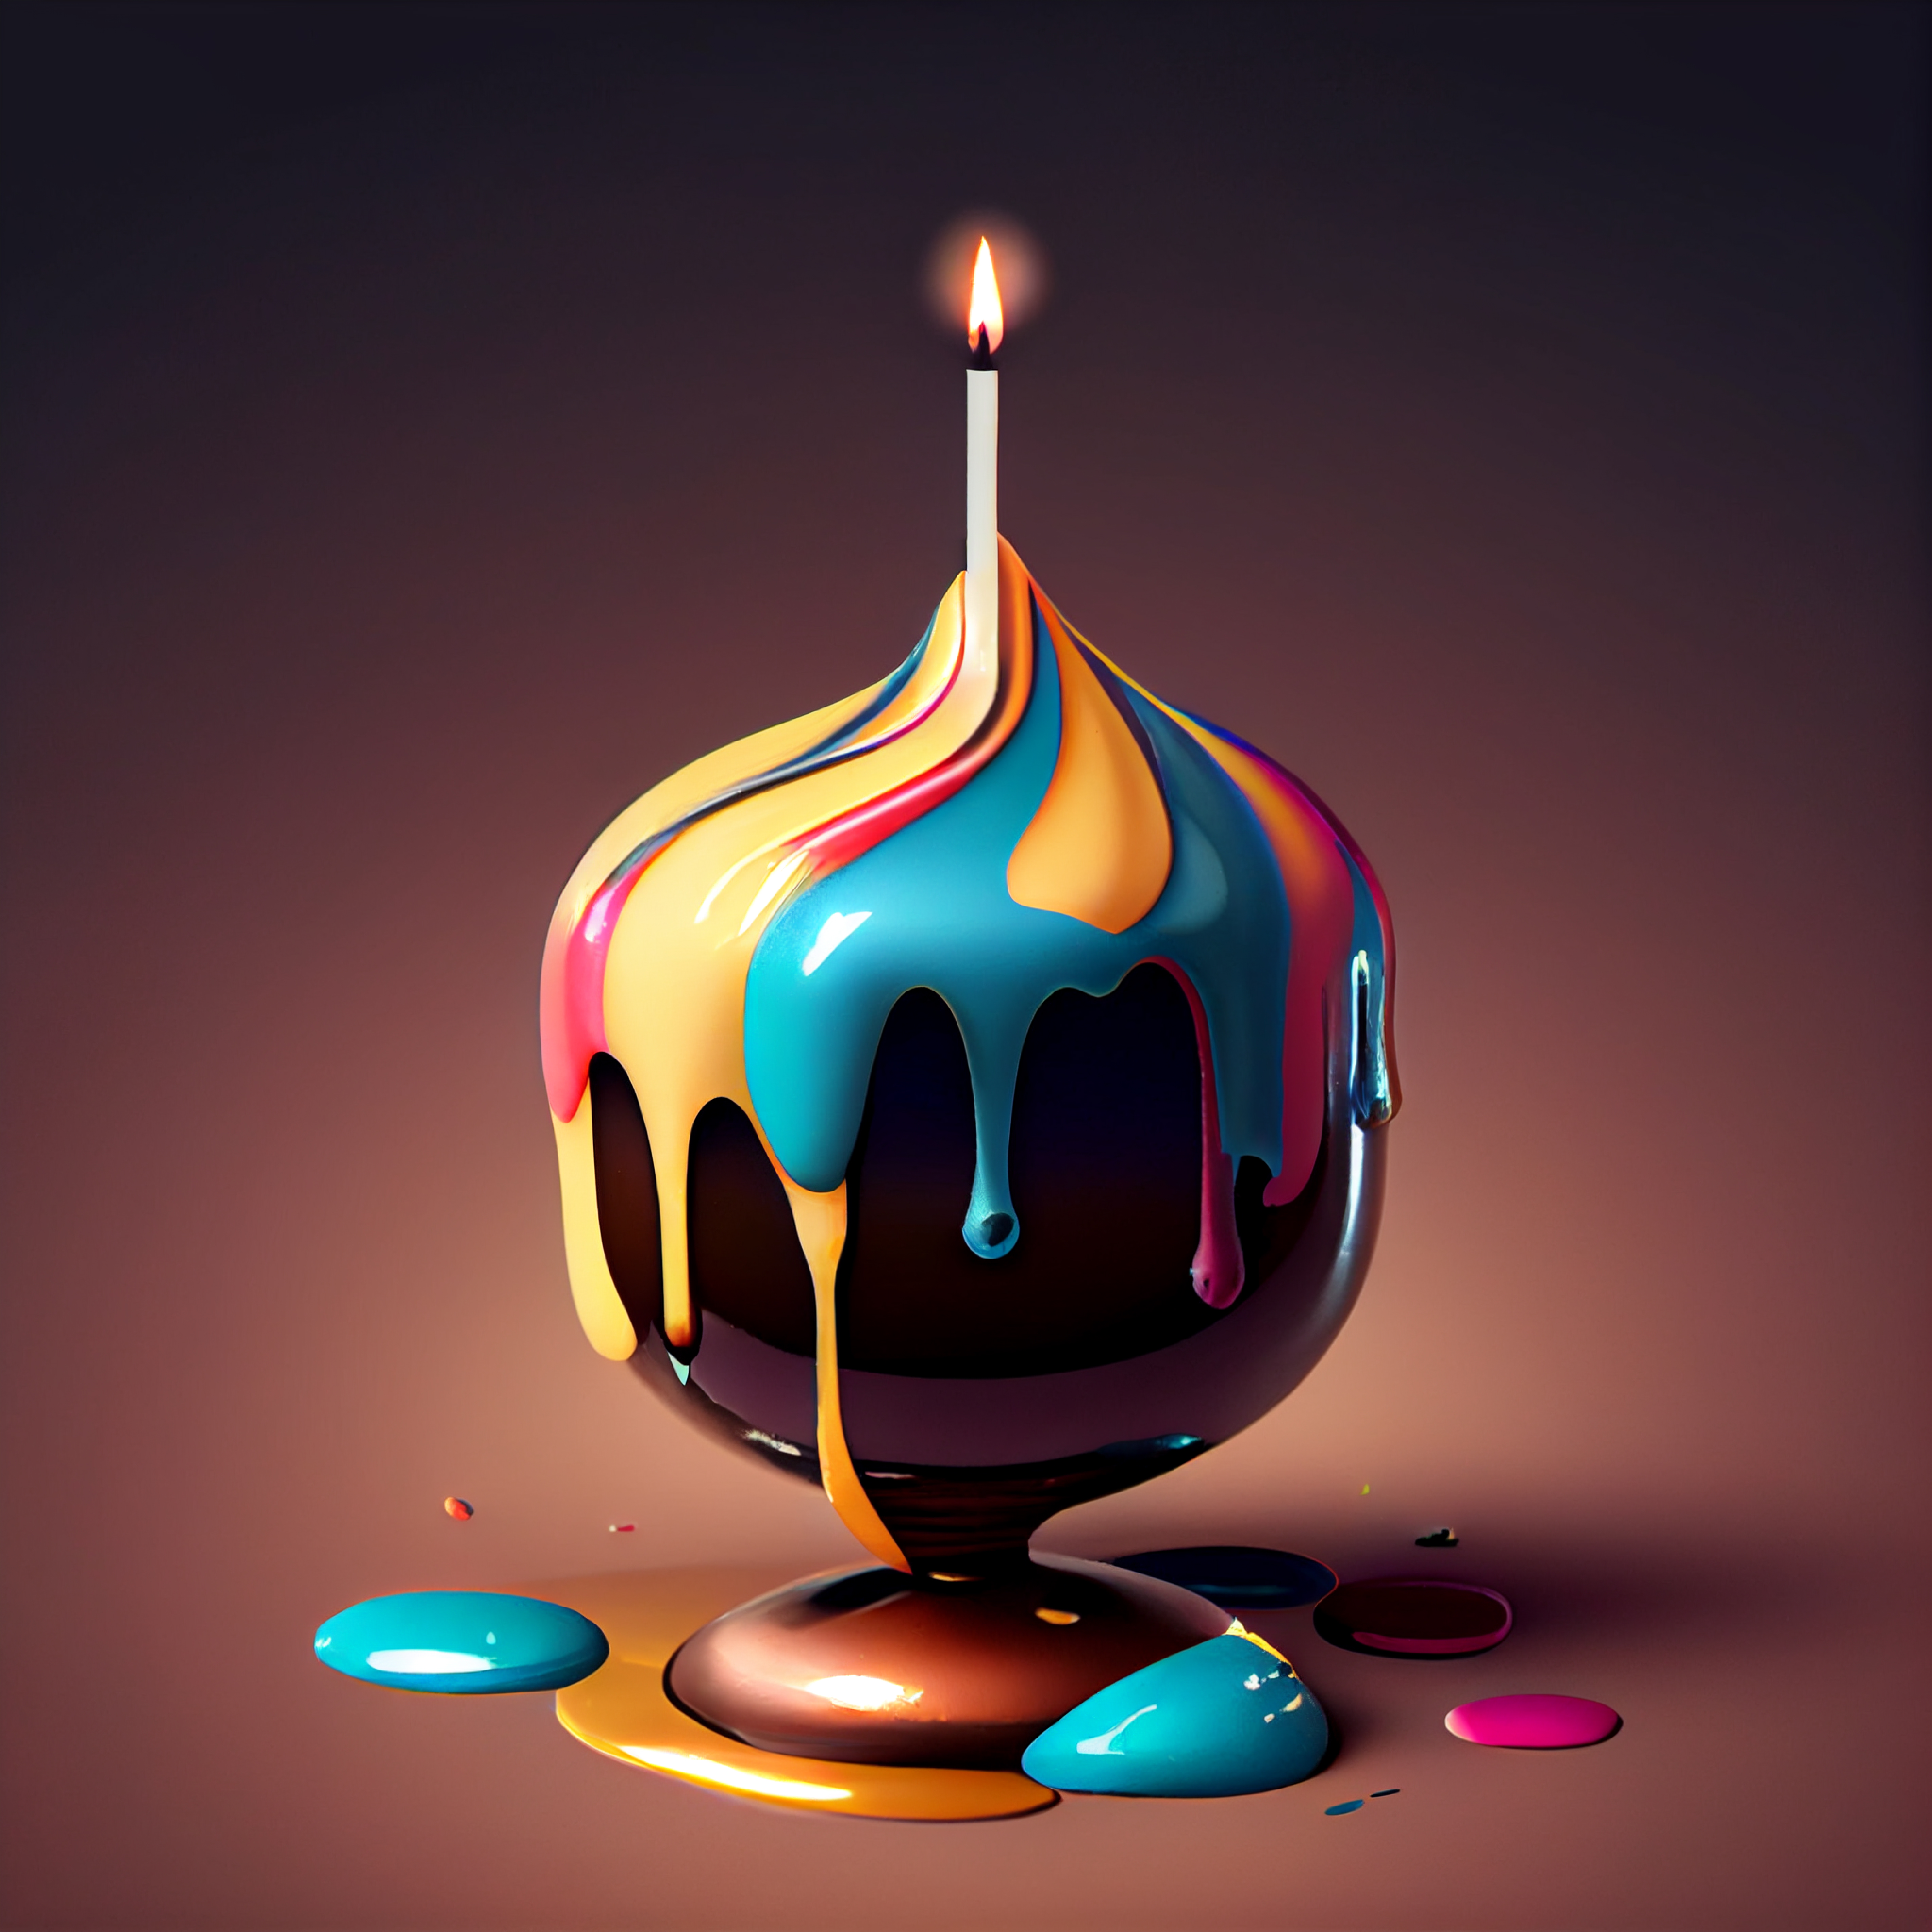 100+] Birthday Cake Wallpapers | Wallpapers.com